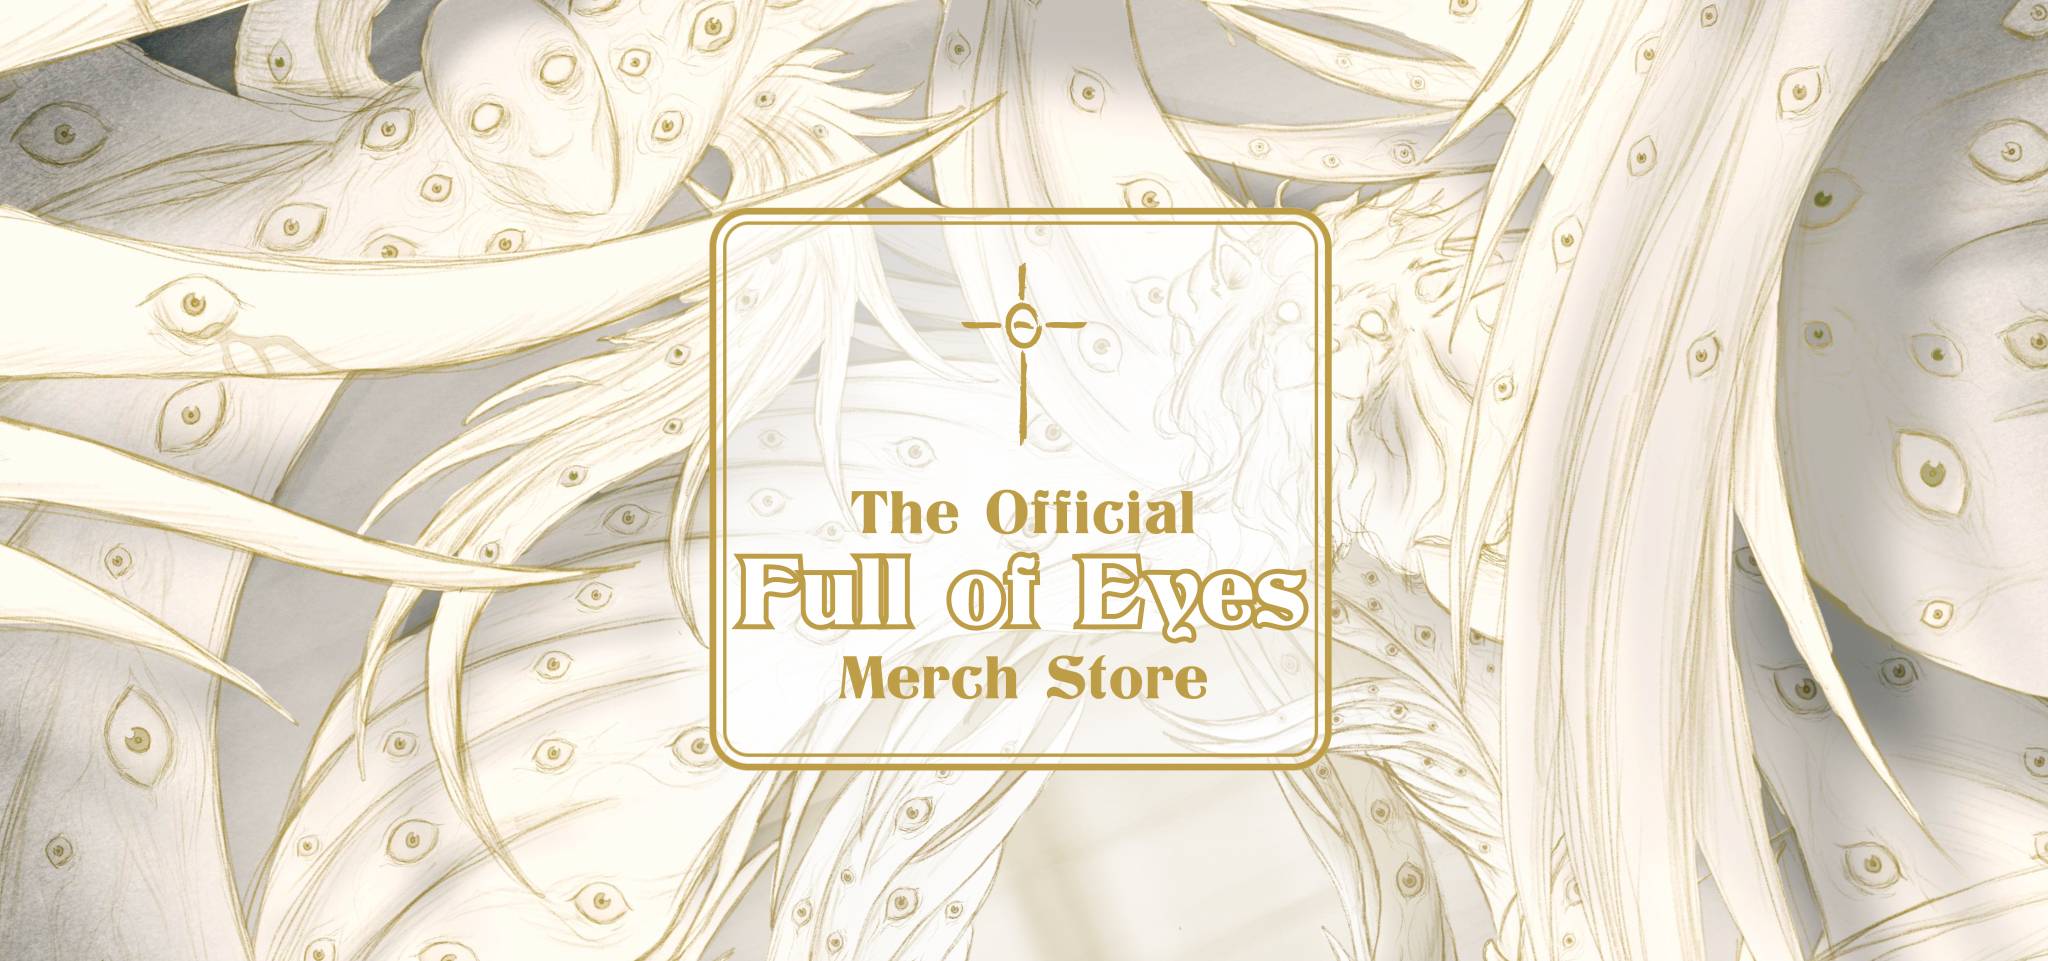 The Official Full of Eyes Merch Store